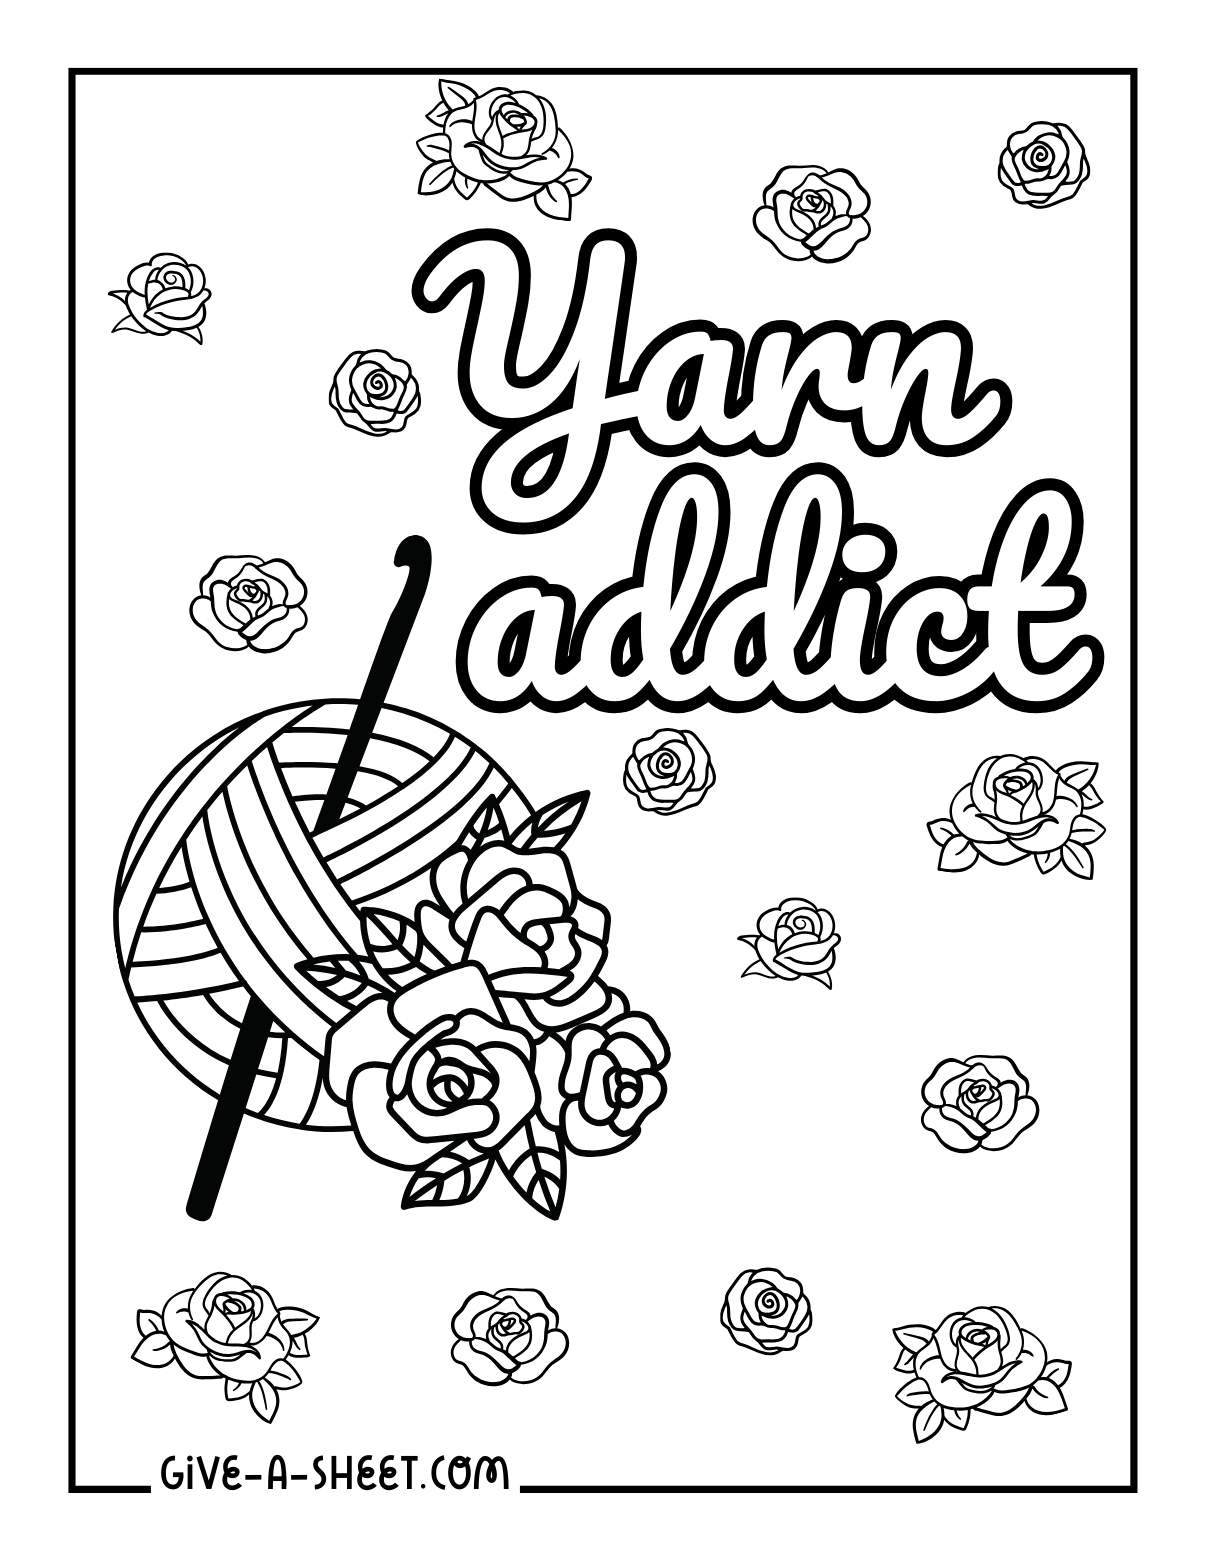 Crochet project floral coloring page.